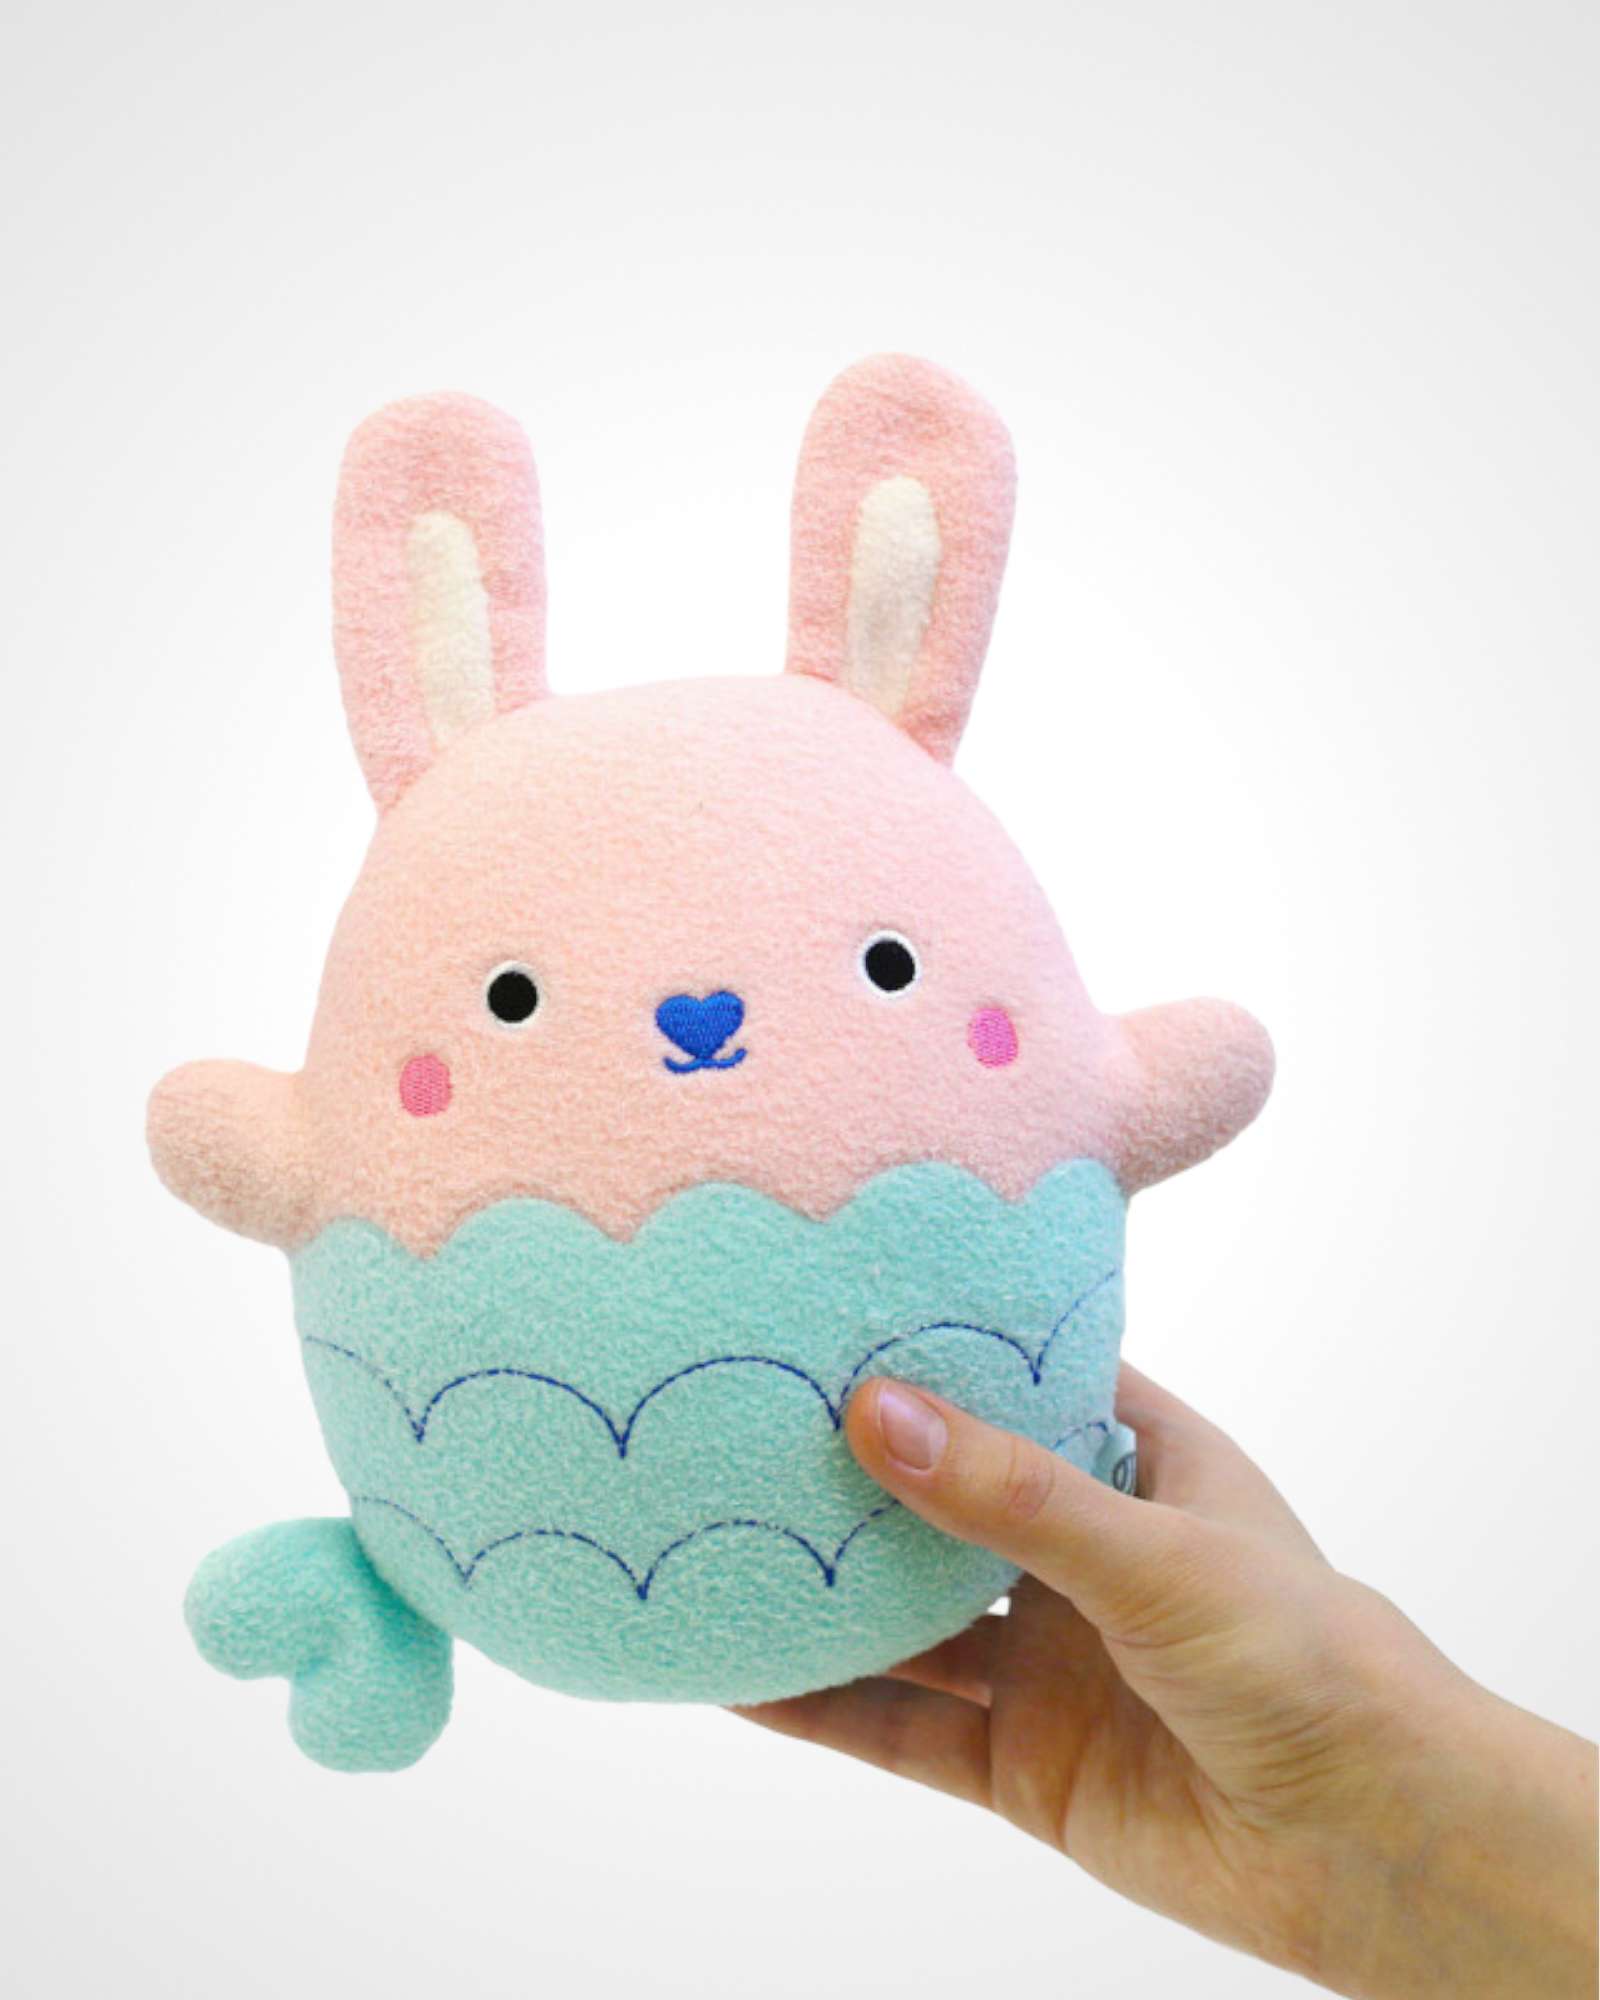 NOODOLL - RICEBOMBSHELL Plush Toy | Soft Pink & Baby Blue